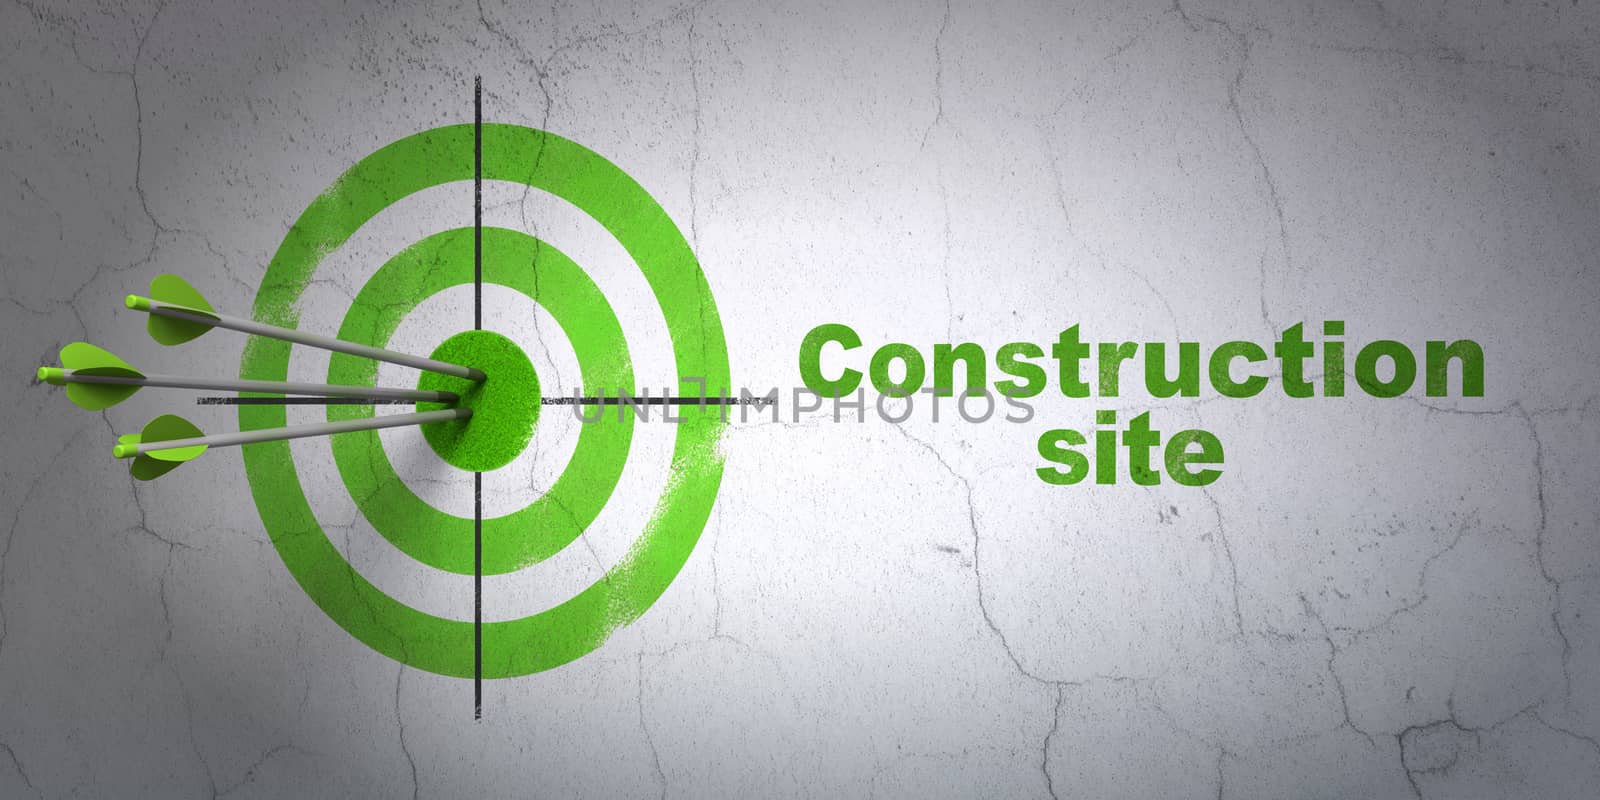 Success building construction concept: arrows hitting the center of target, Green Construction Site on wall background, 3D rendering